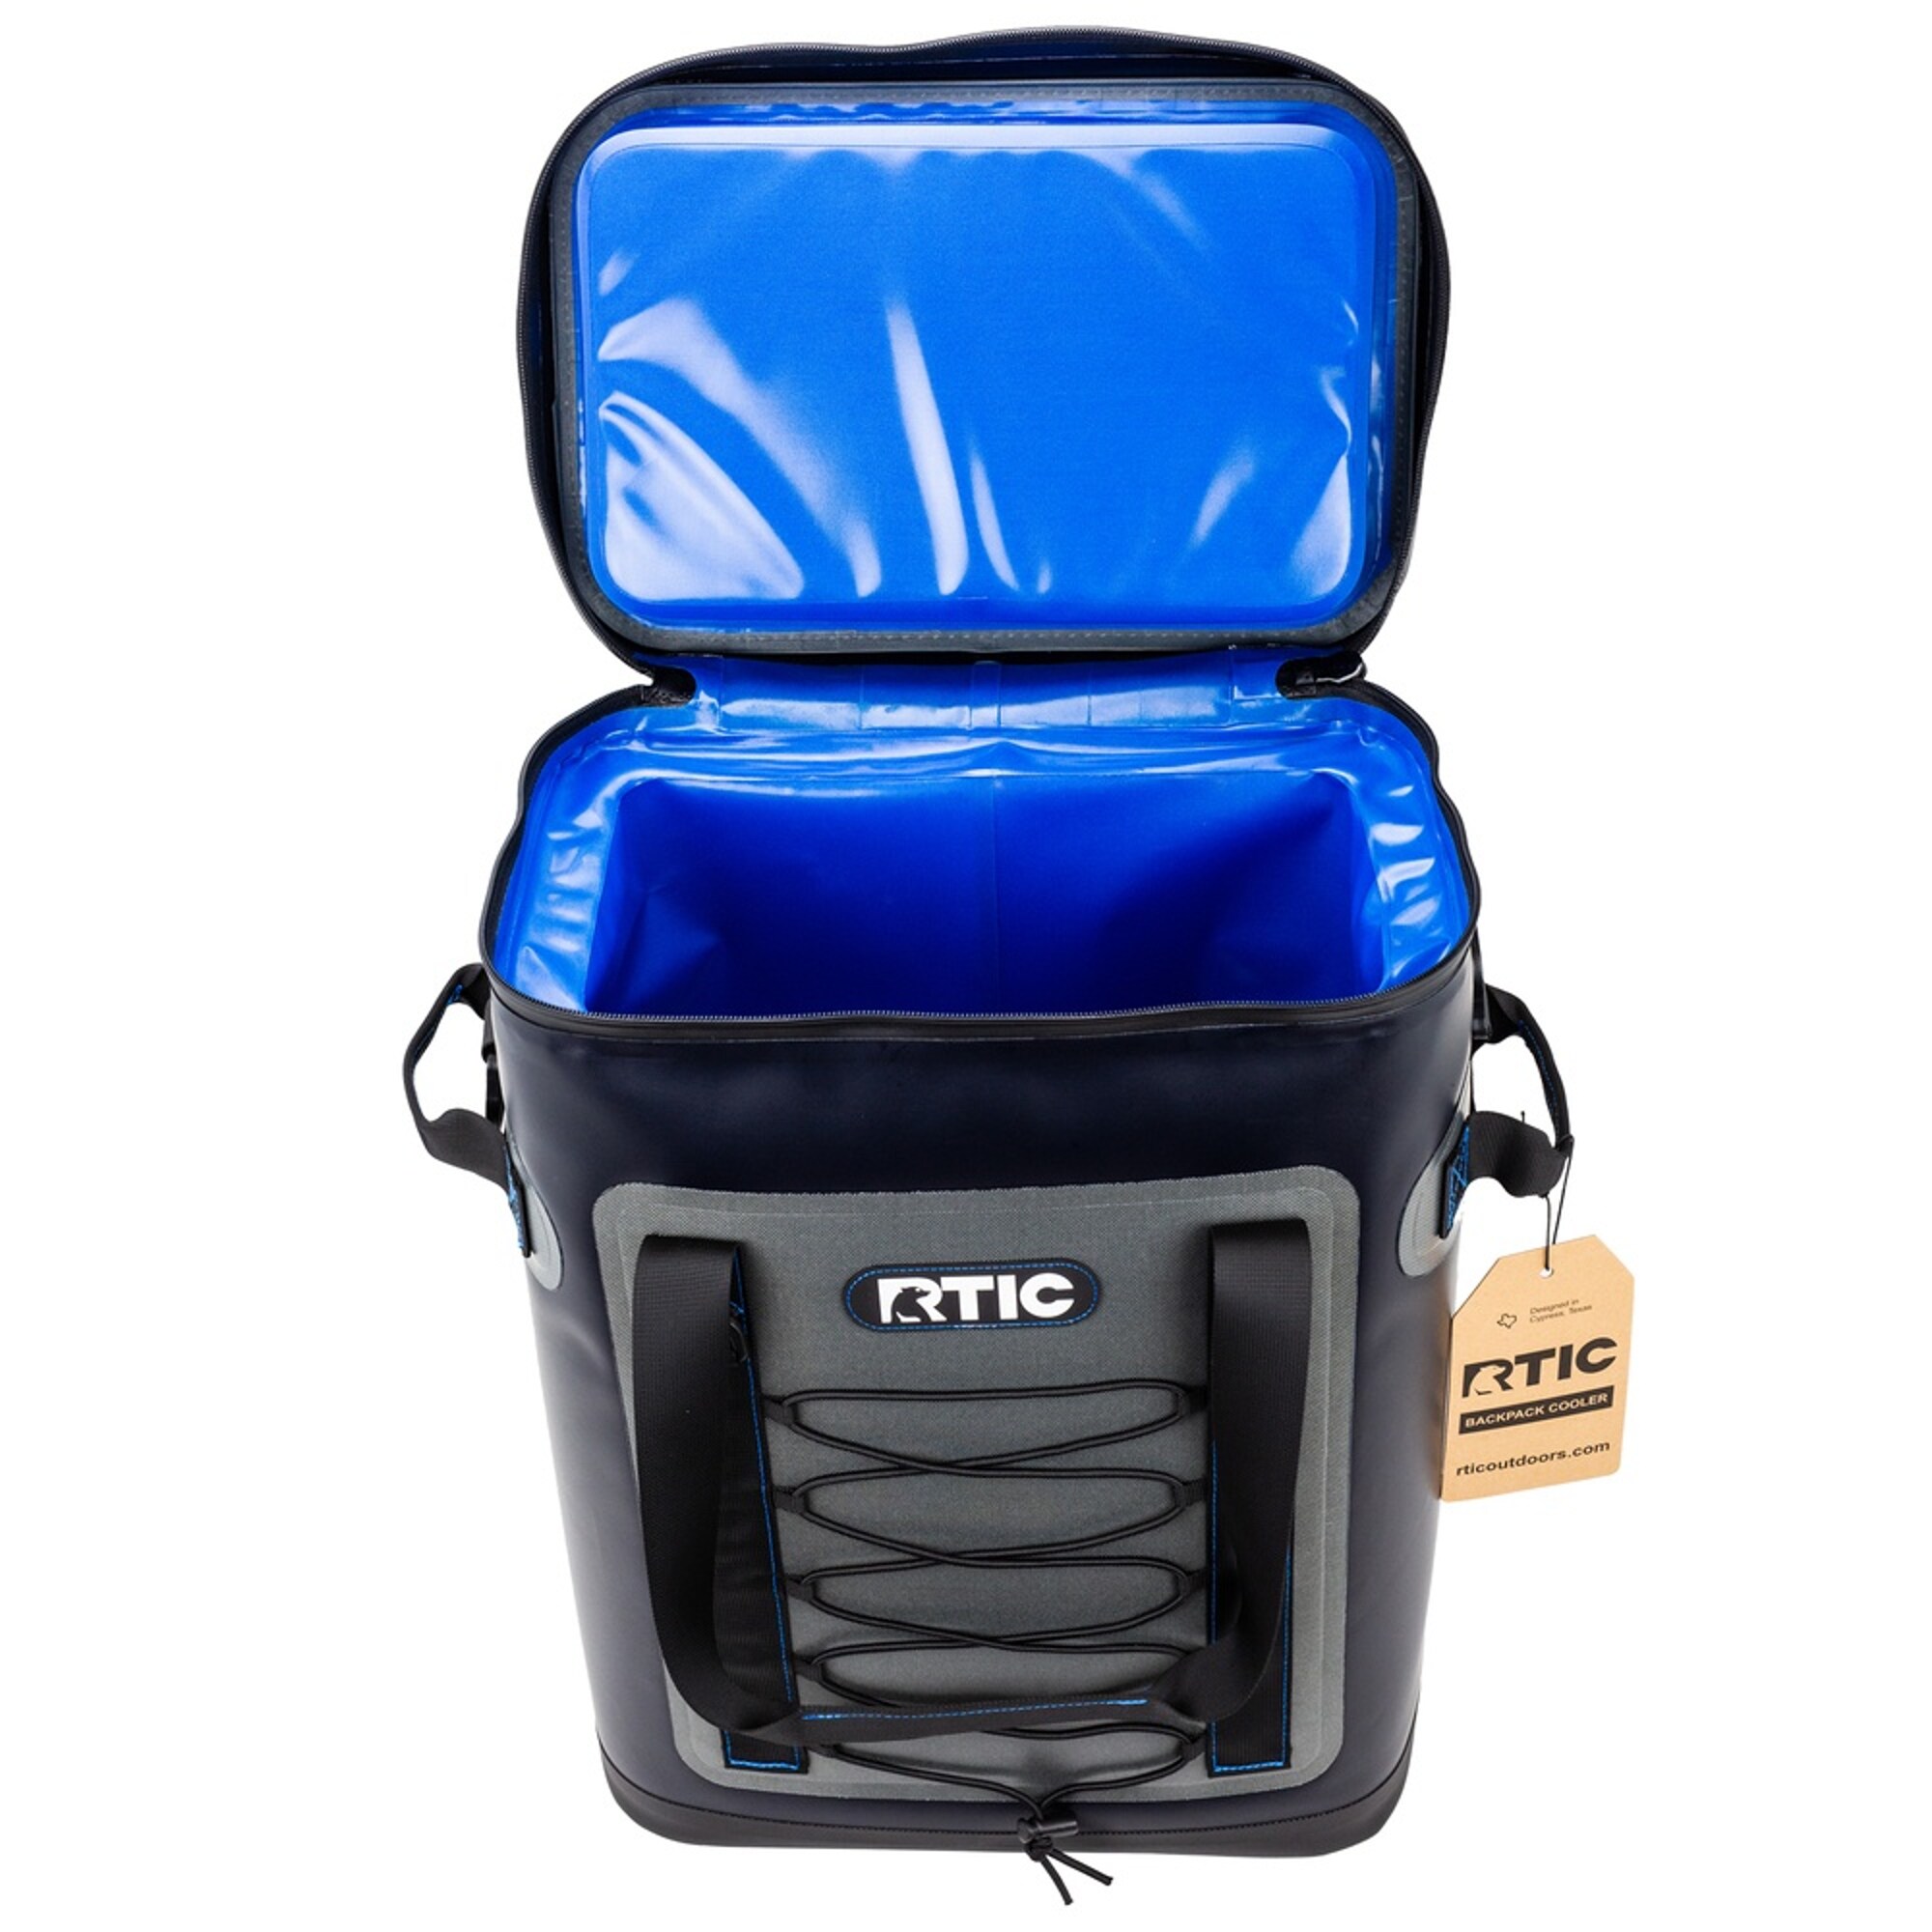 RTIC Insulated Tote Cooler | eBay